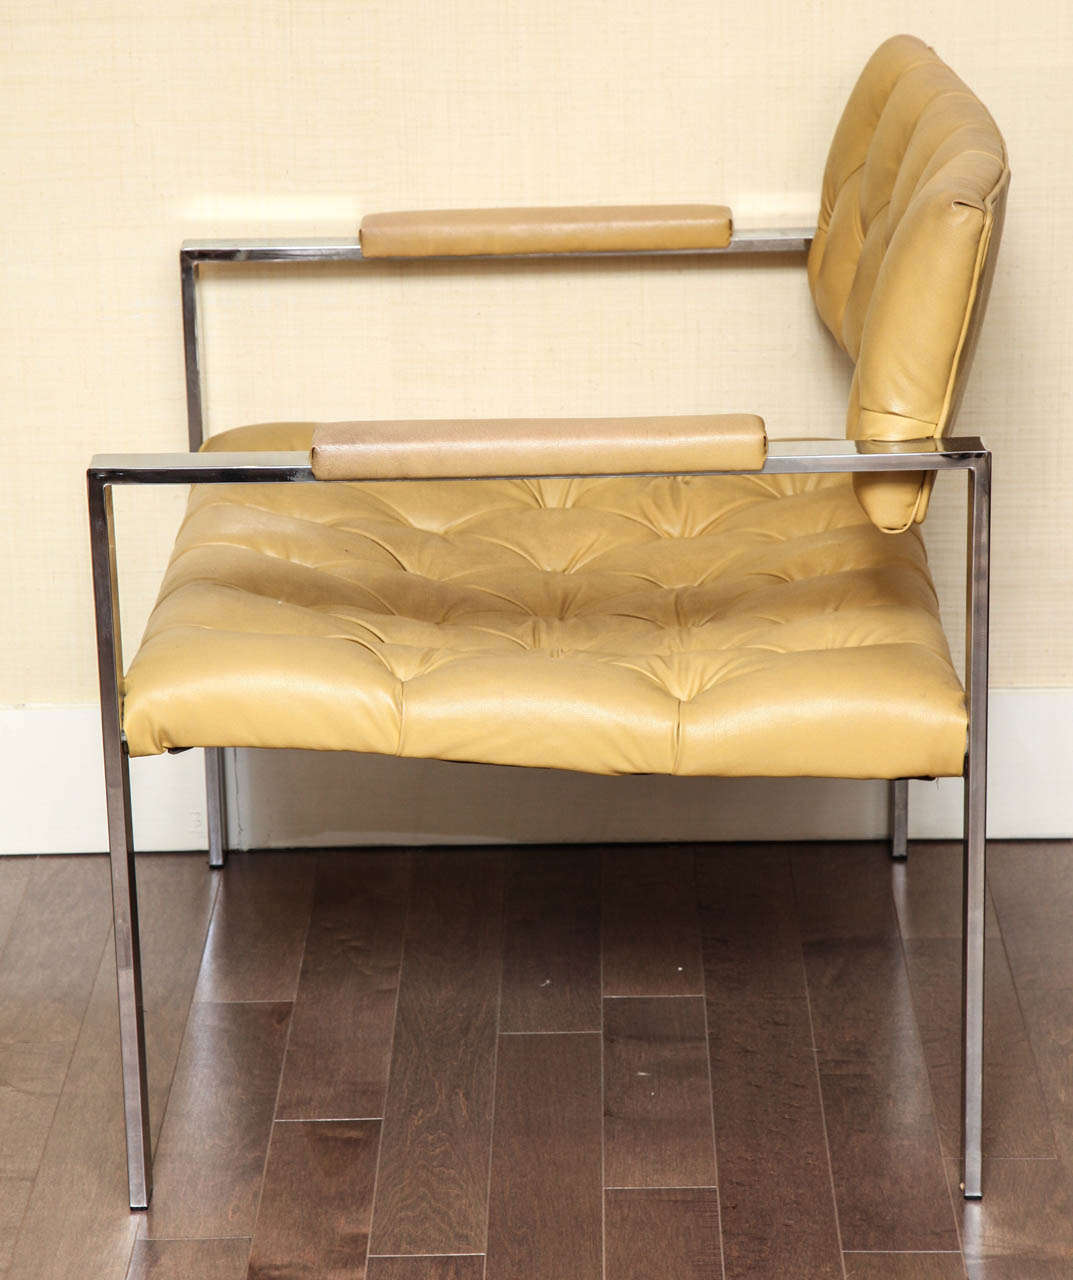 Tufted Chrome Lounge Chairs by Milo Baughman for Thayer Coggin, Circa 1968 1